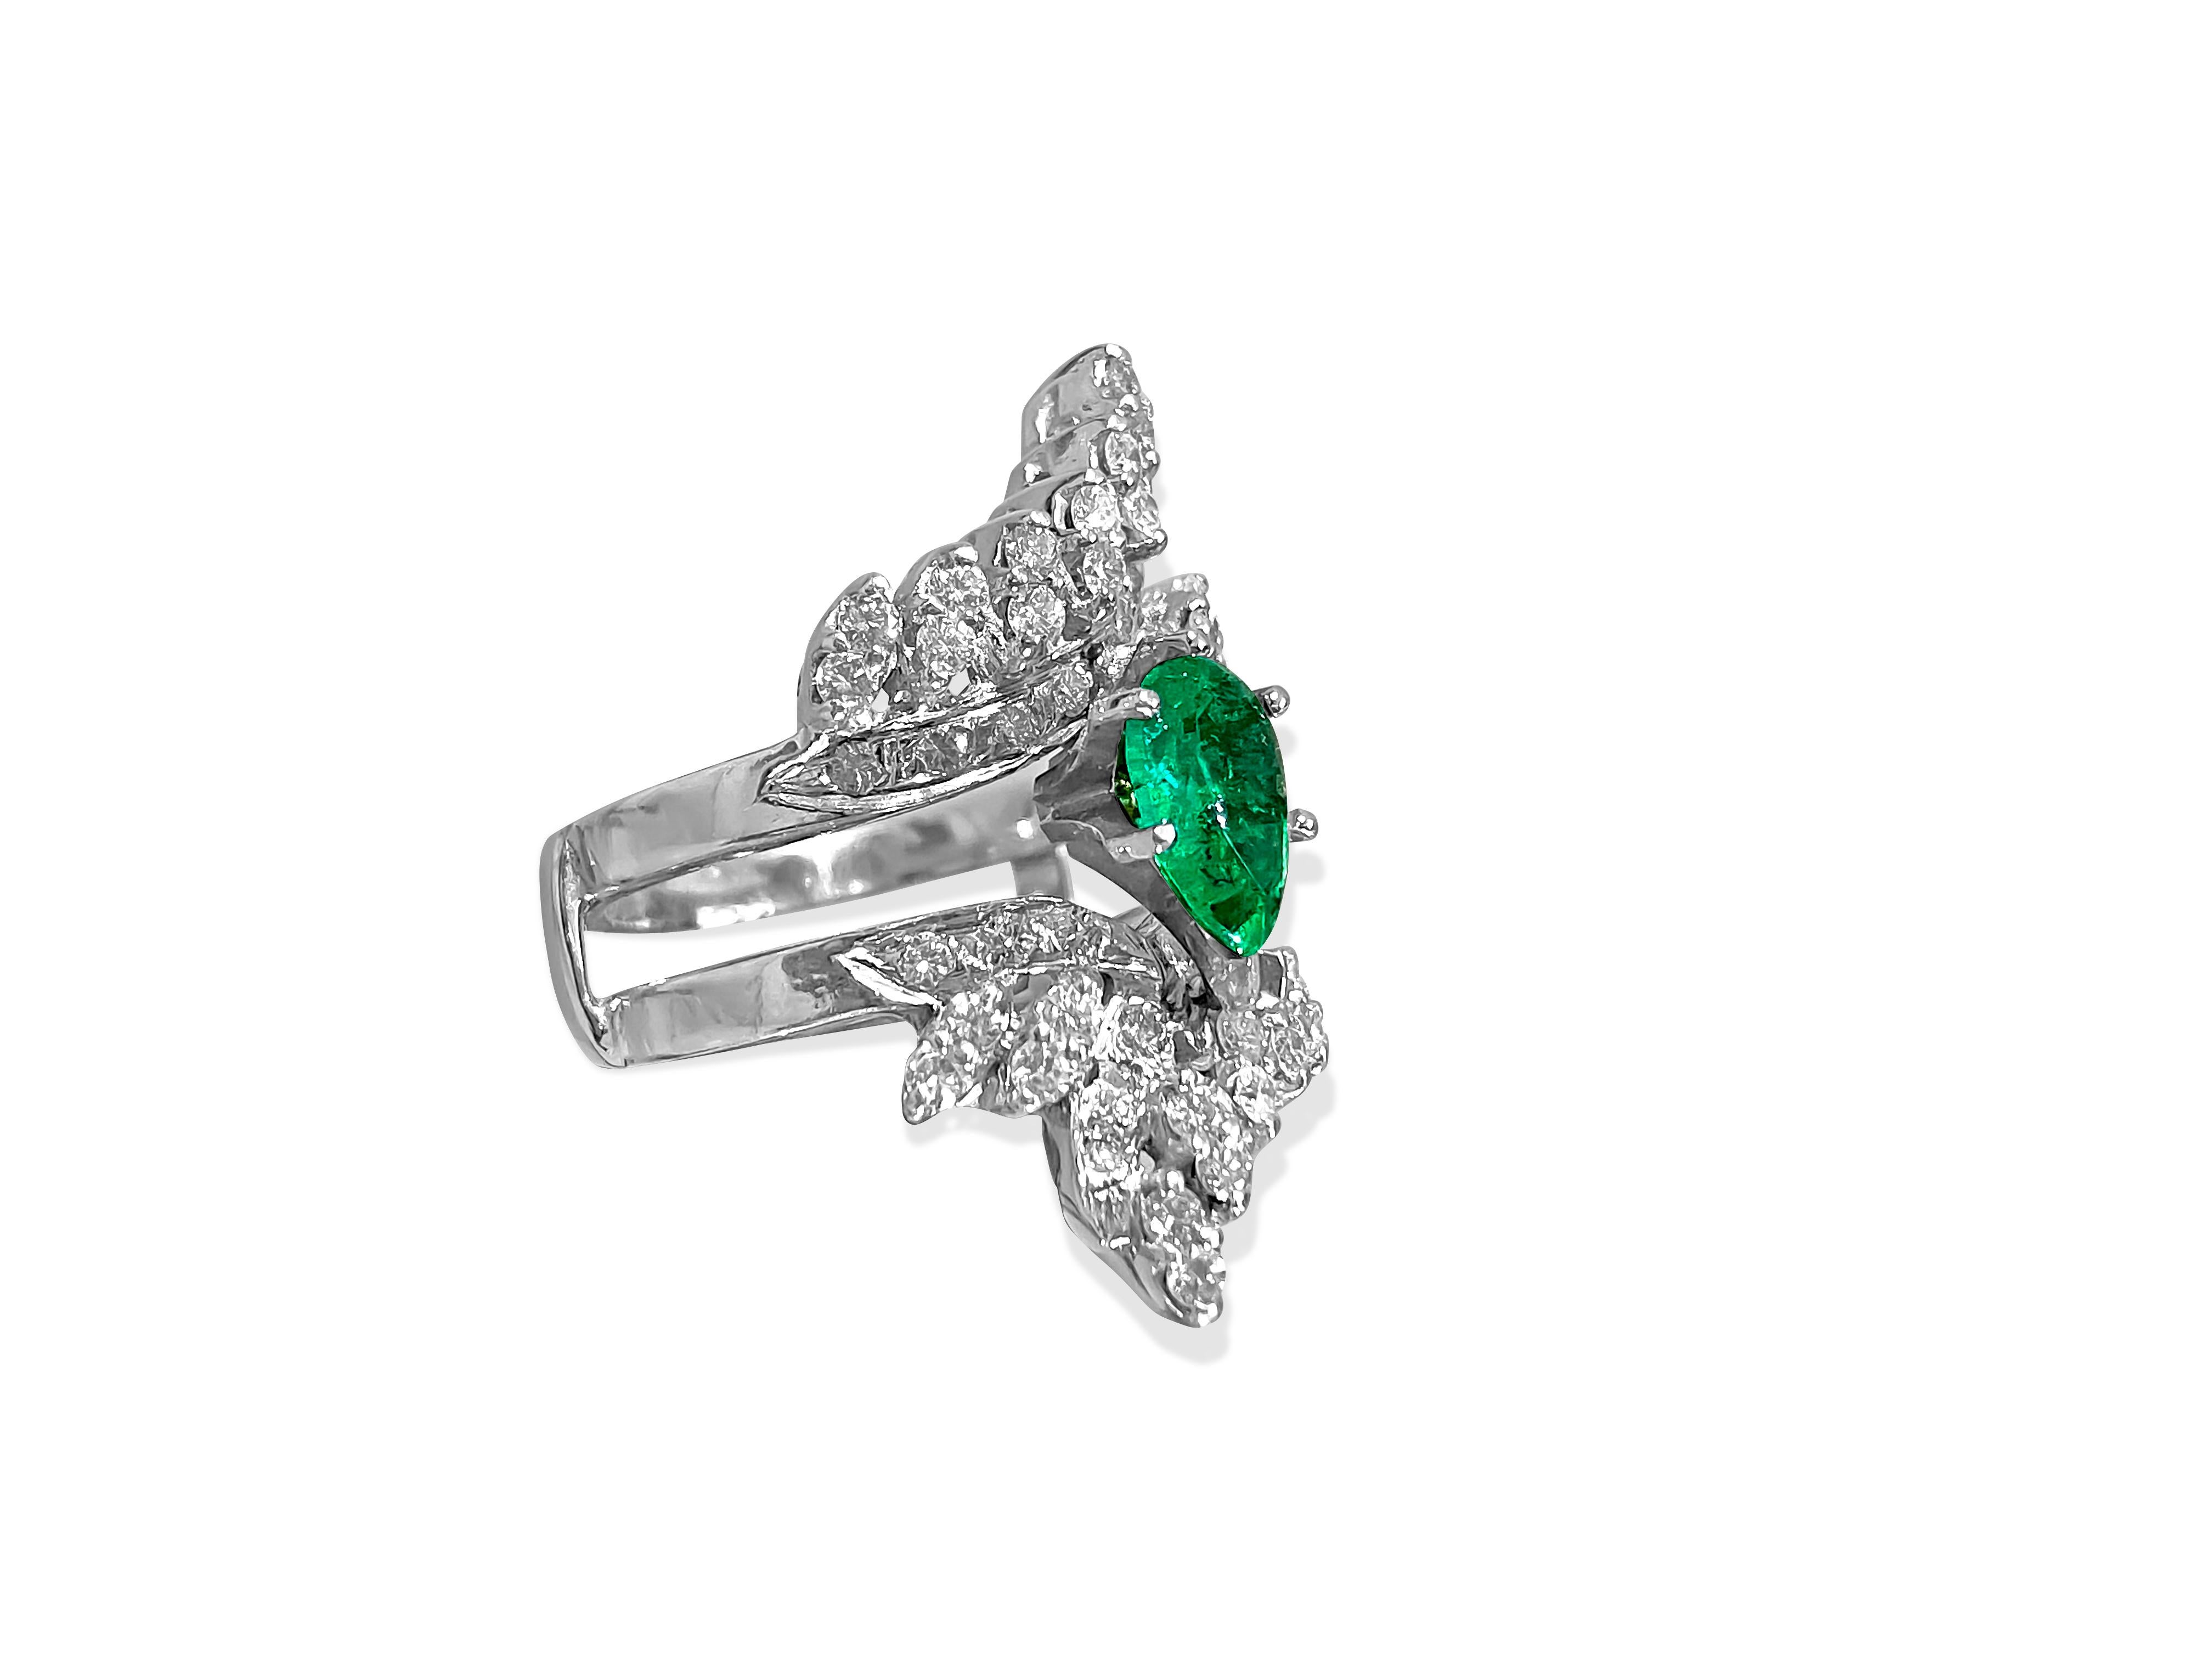 Metal: 14k white gold. 

100% natural earth minded, 3.50 carat Colombian emerald. Pear shape emerald set in prongs. 

2.00 carat weight total diamonds. VS-SI clarity and G color diamonds.

Ring size: US 6.50
Free ring resizing available.
